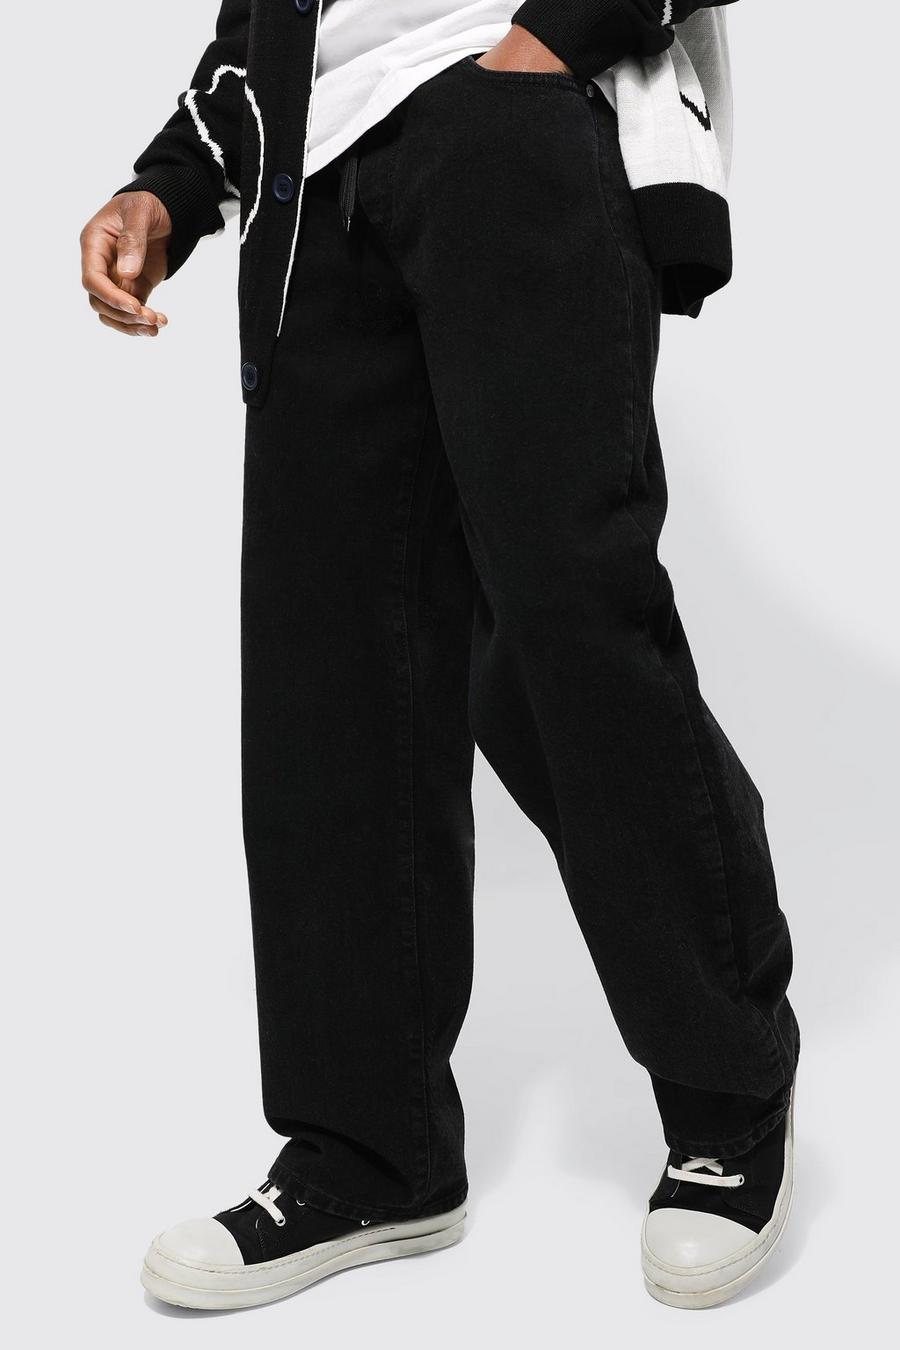 Washed black Baggy Fit Drawstring Jeans 